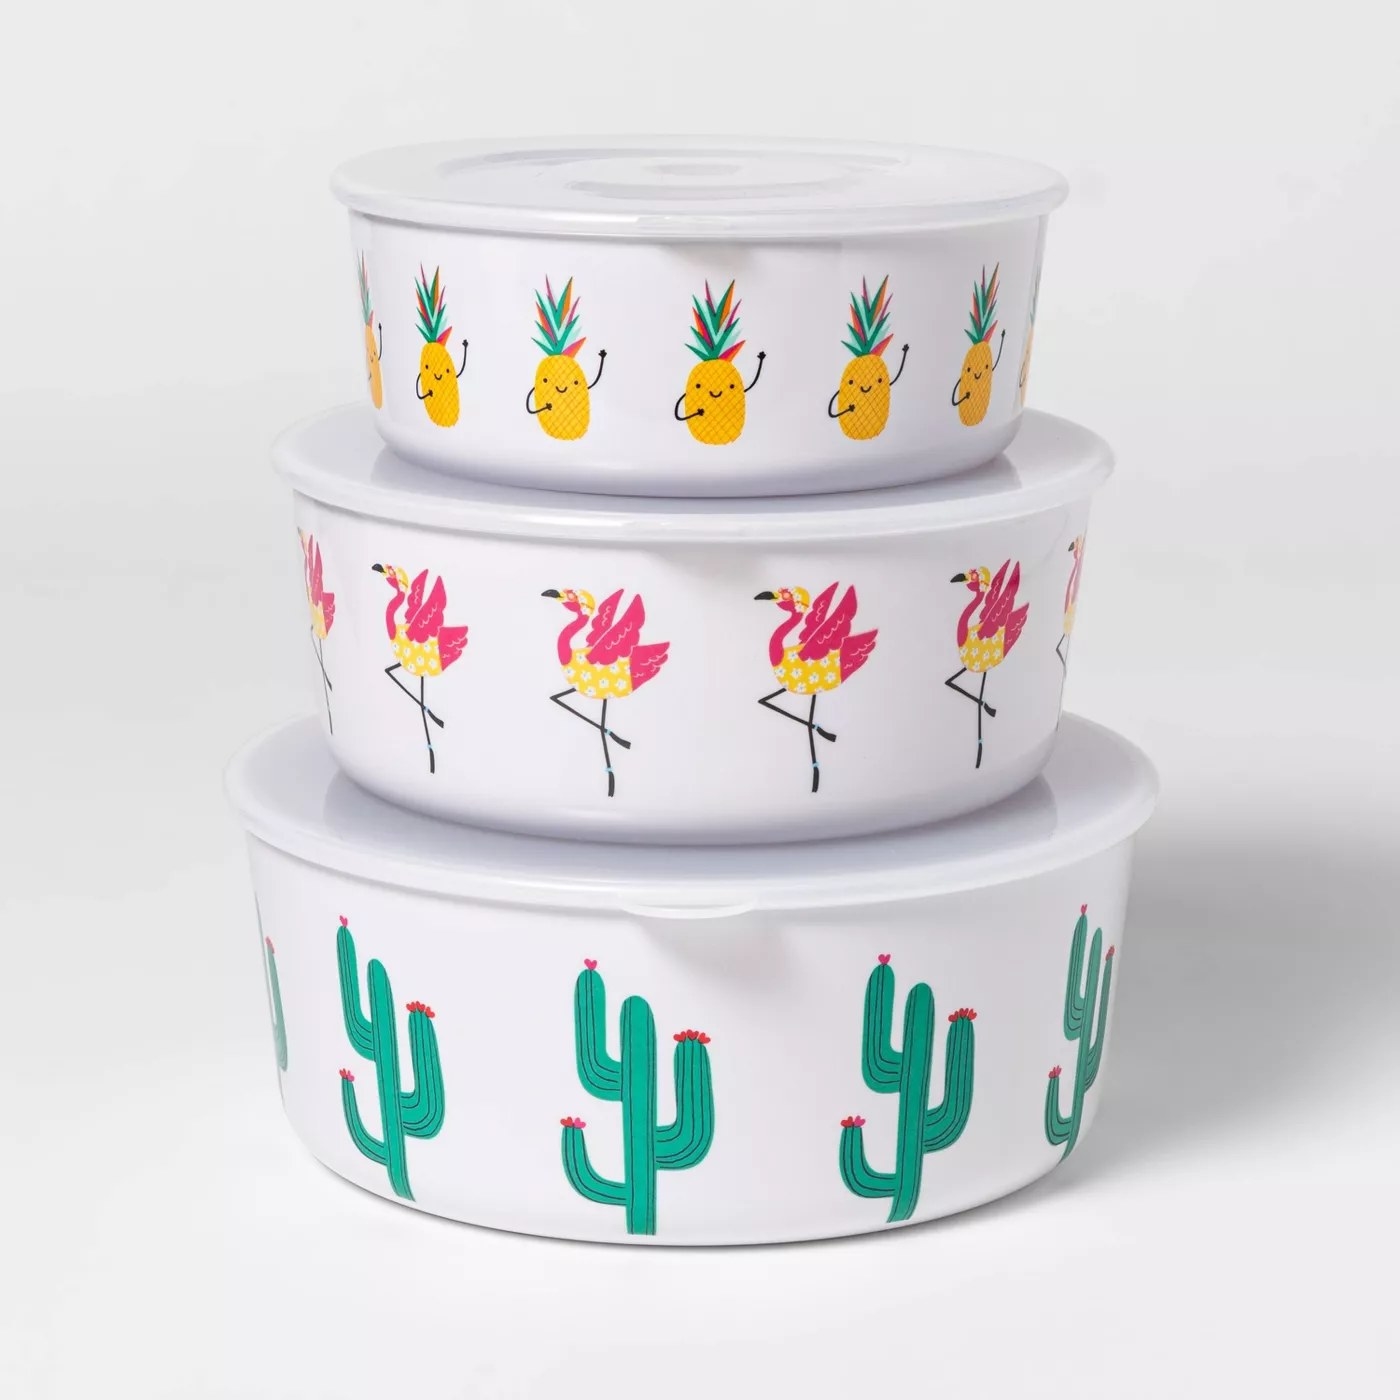 The bottom container has cacti, the middle one has flamingoes and the top one has pineapples with little faces